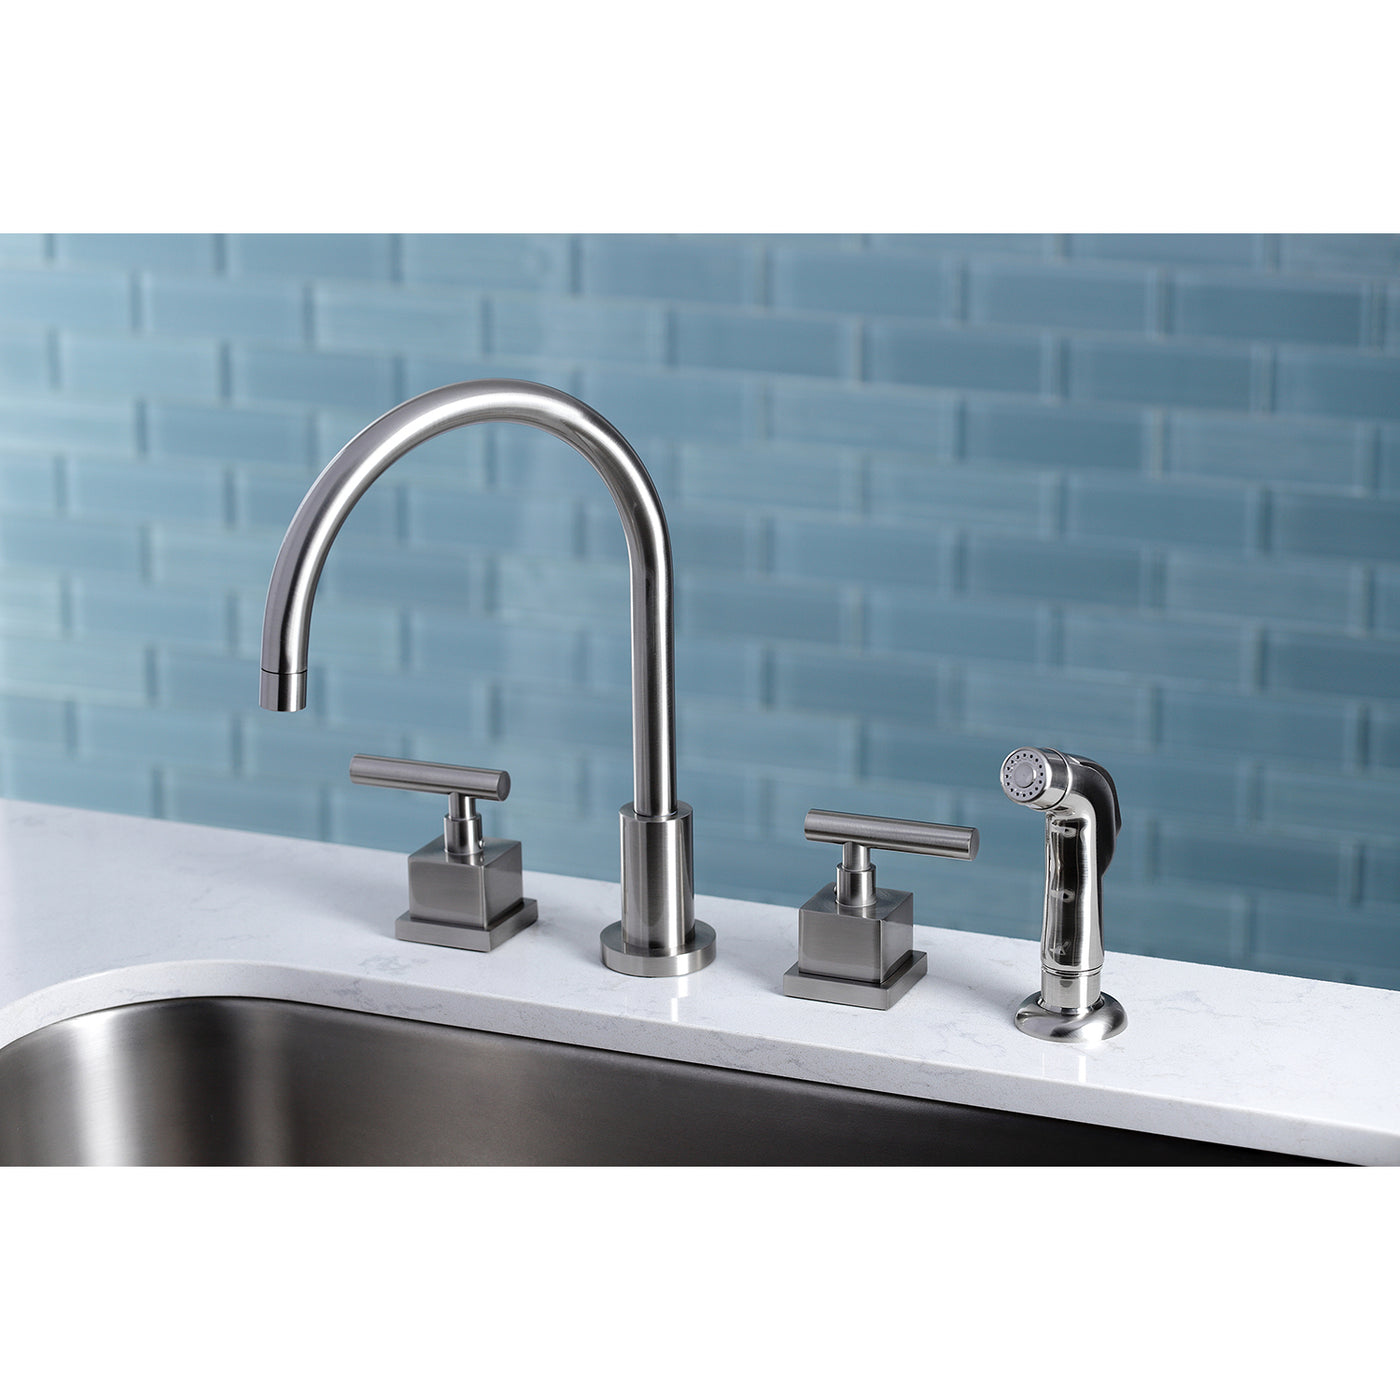 Elements of Design ES8728CQL Widespread Kitchen Faucet with Plastic Sprayer, Brushed Nickel